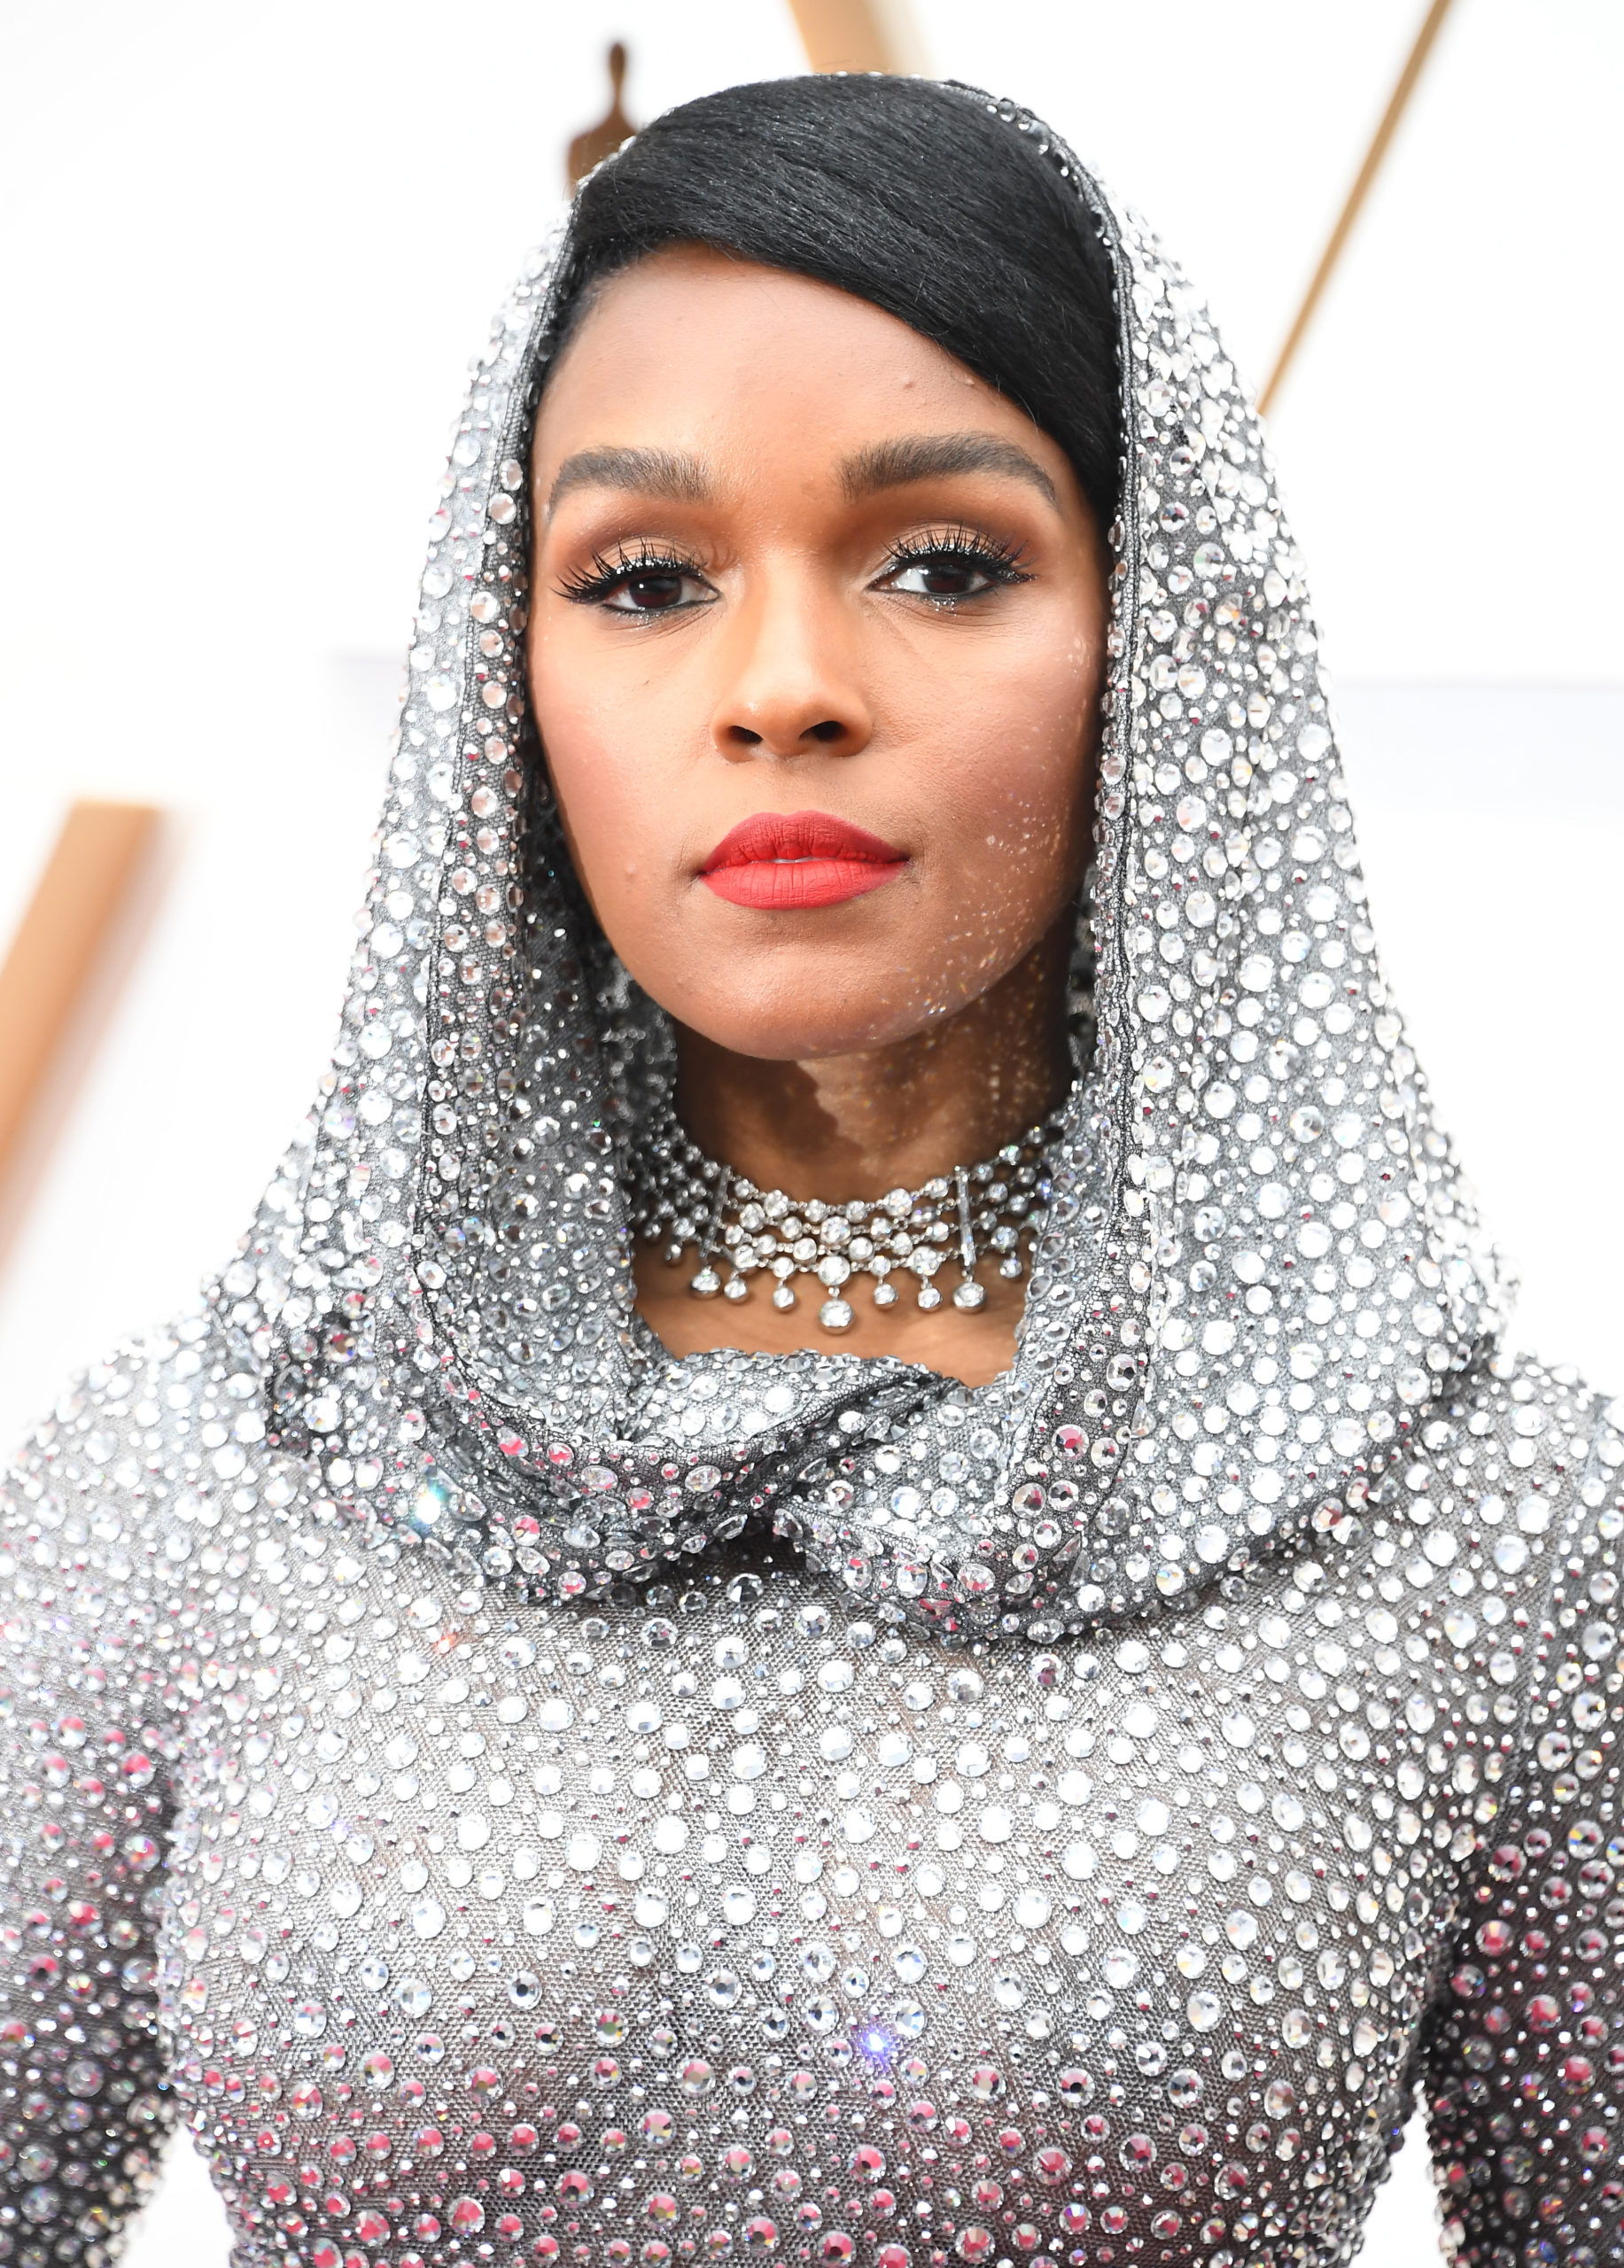 Janelle Monáe Glistened At The 92nd Academy Awards